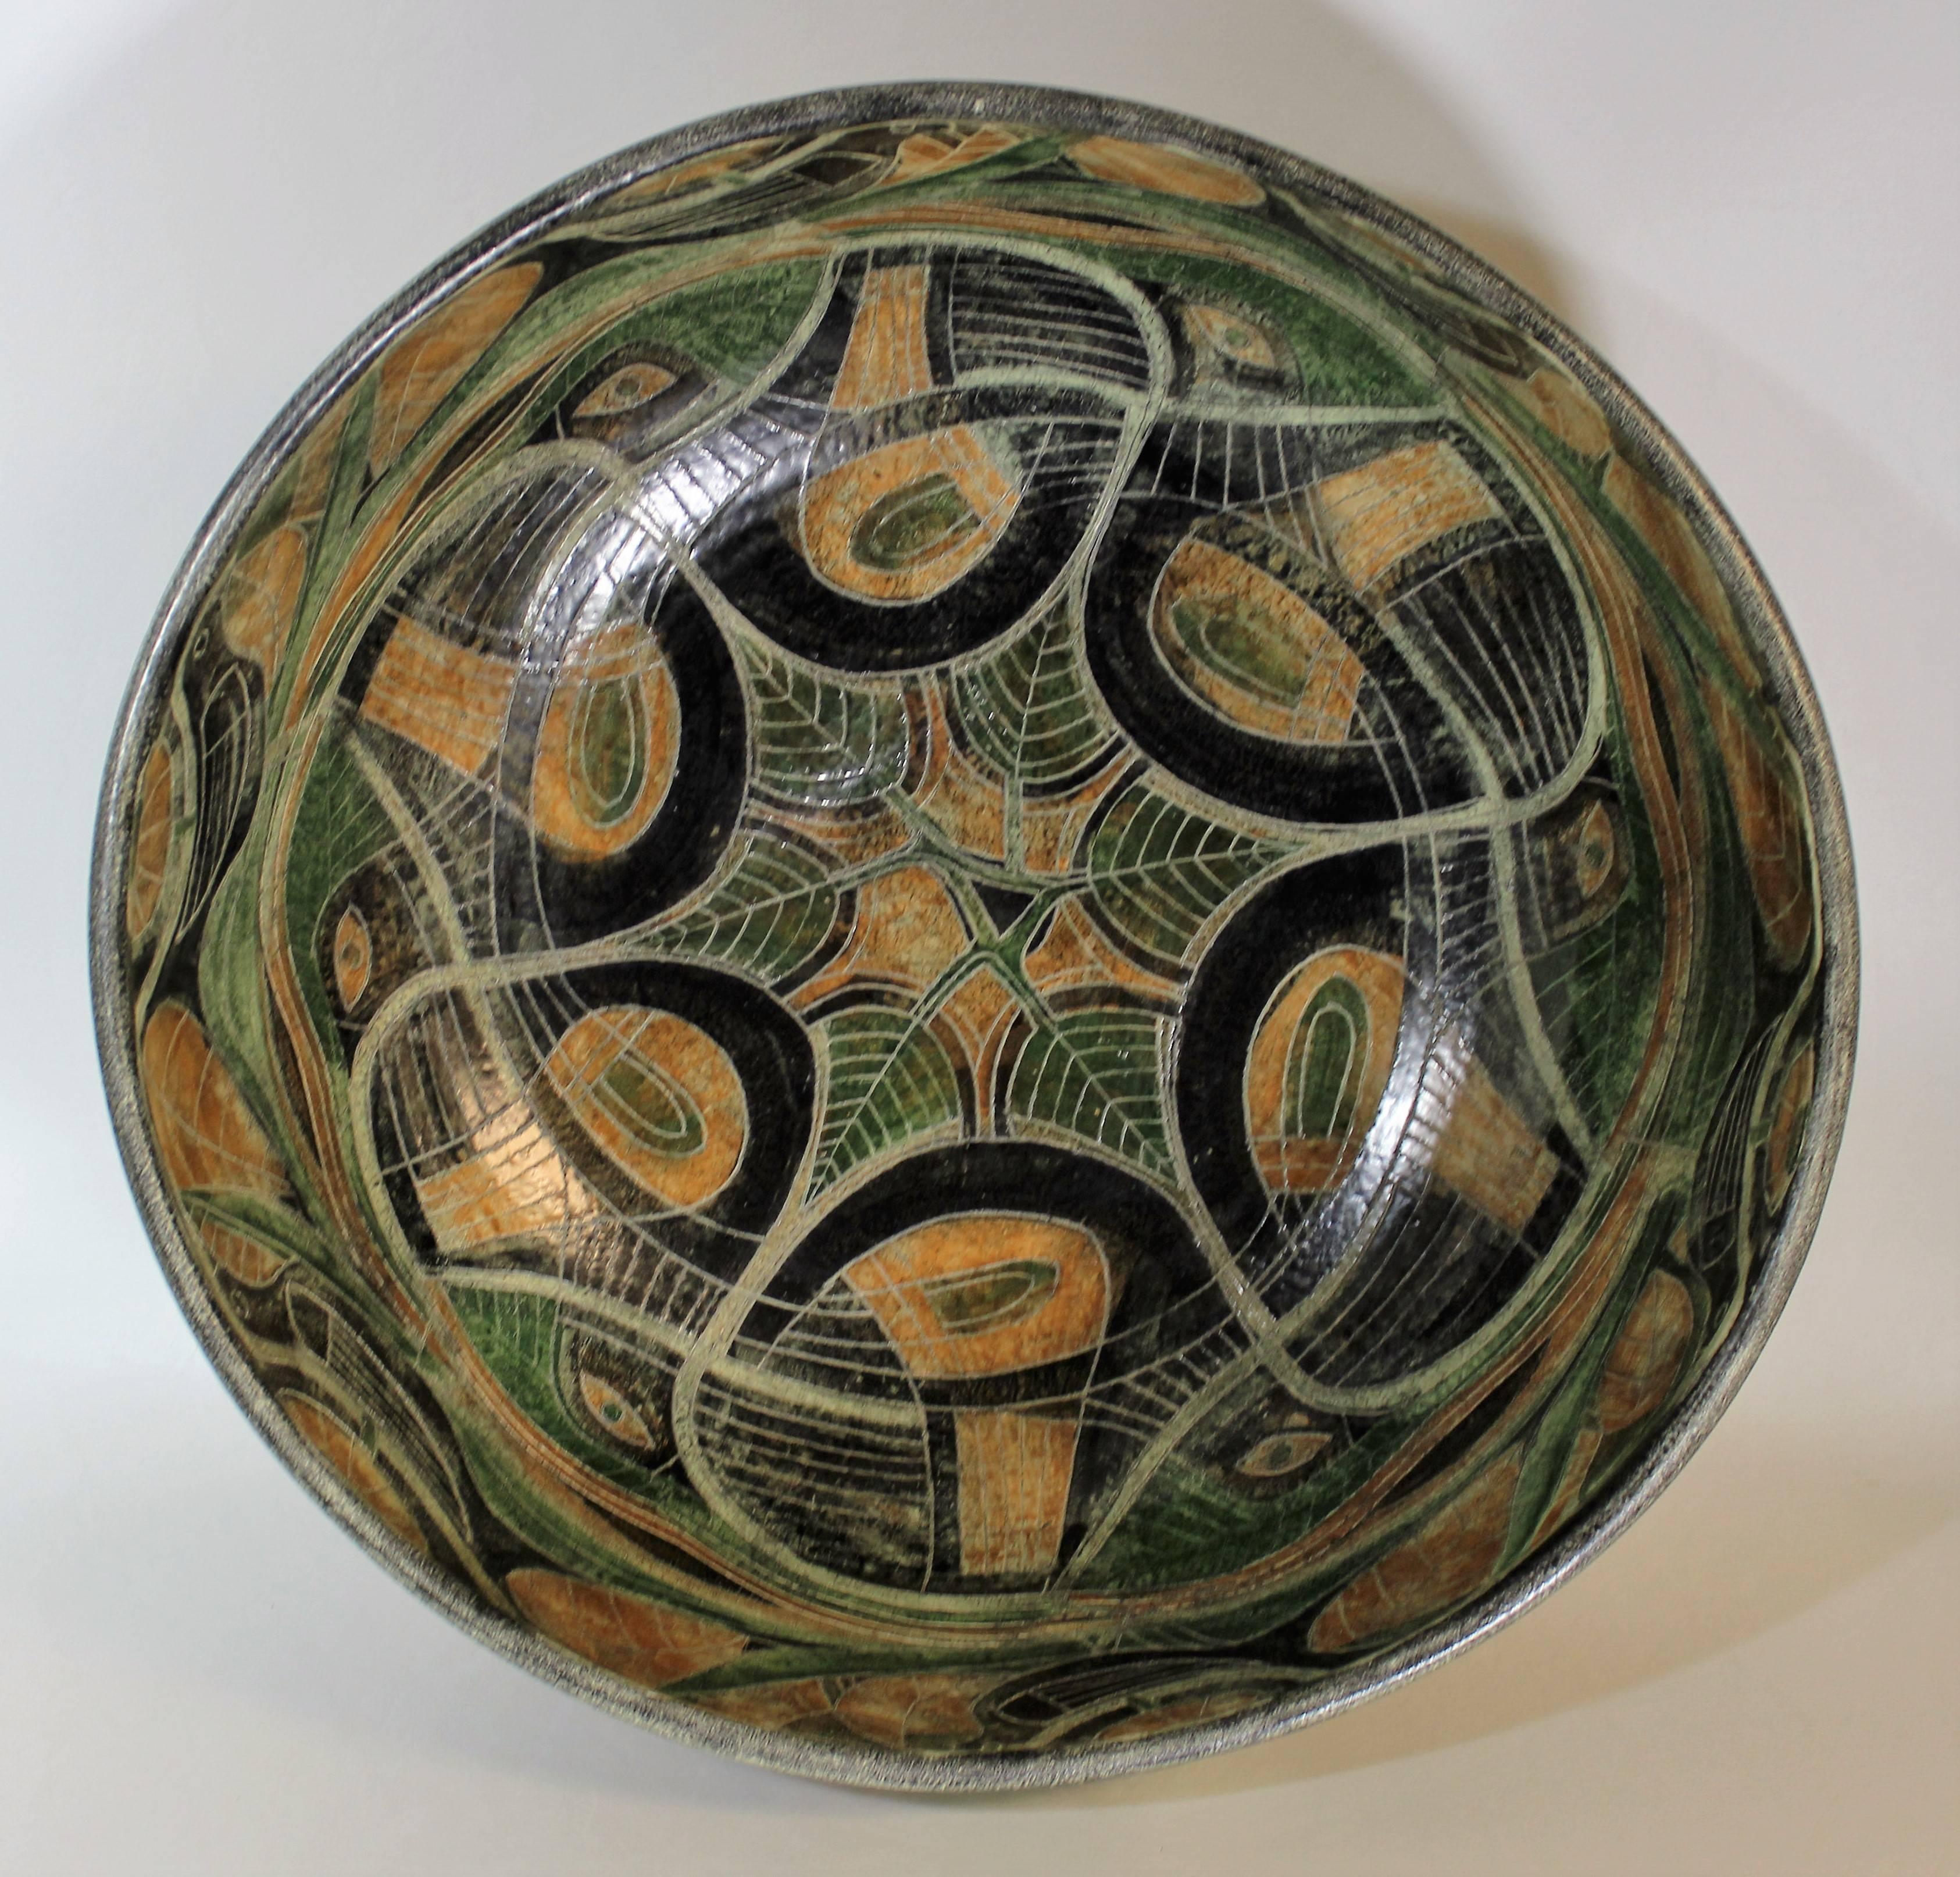 Studio pottery Mid-Century Modern bowl by Theo and Susan Harlander of Brooklin Pottery, Brooklin, Ontario. This bowl was designed with a whimsical cubist flare featuring rich colours and a matte glaze finish. It has series of interwoven sgraffito